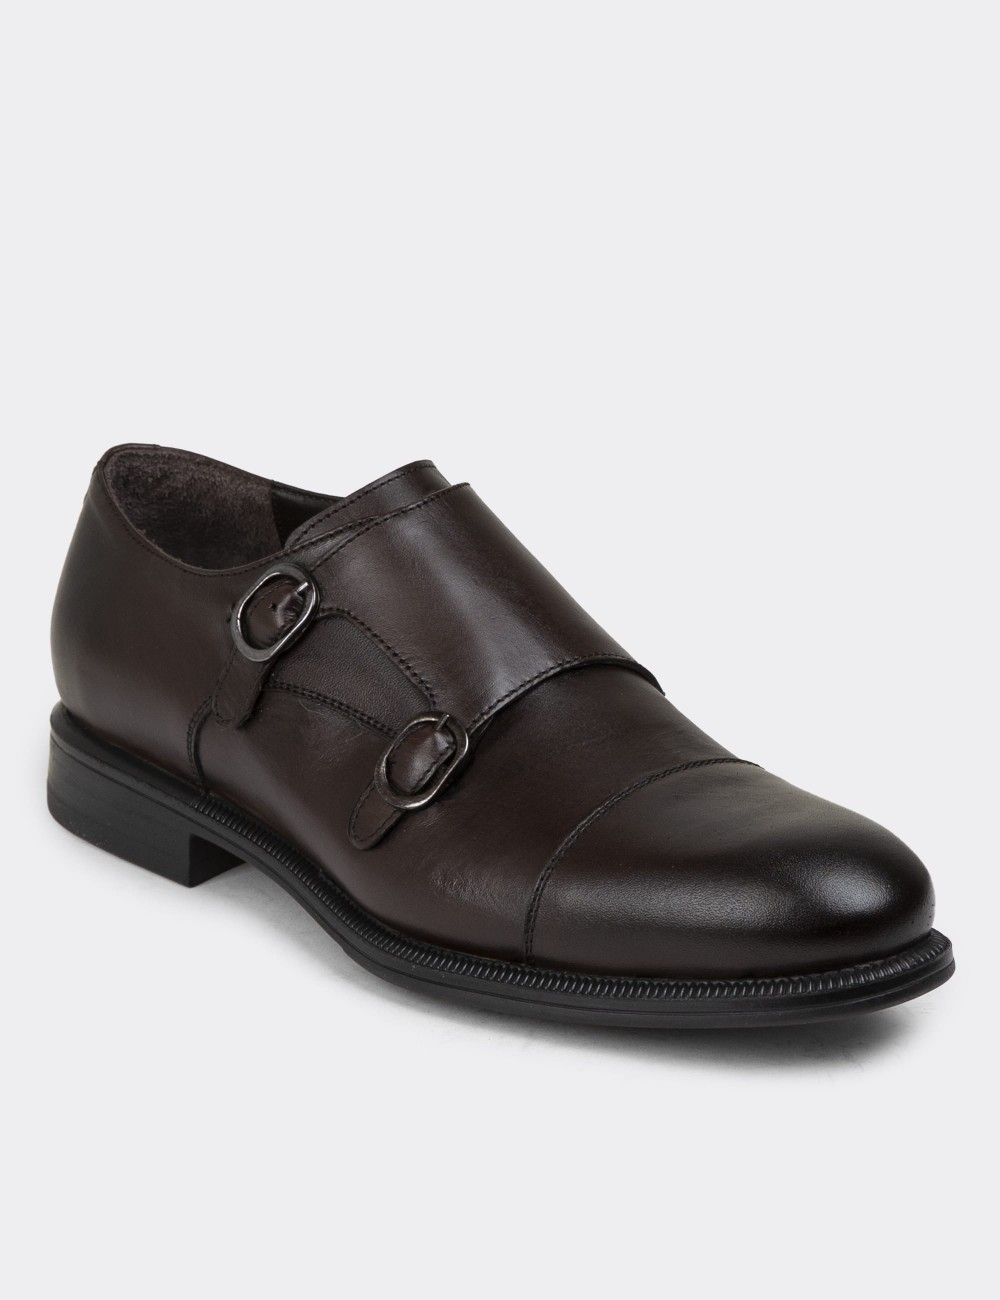 Brown Leather Double Monk-Strap Classic Shoes - 01838MKHVC01